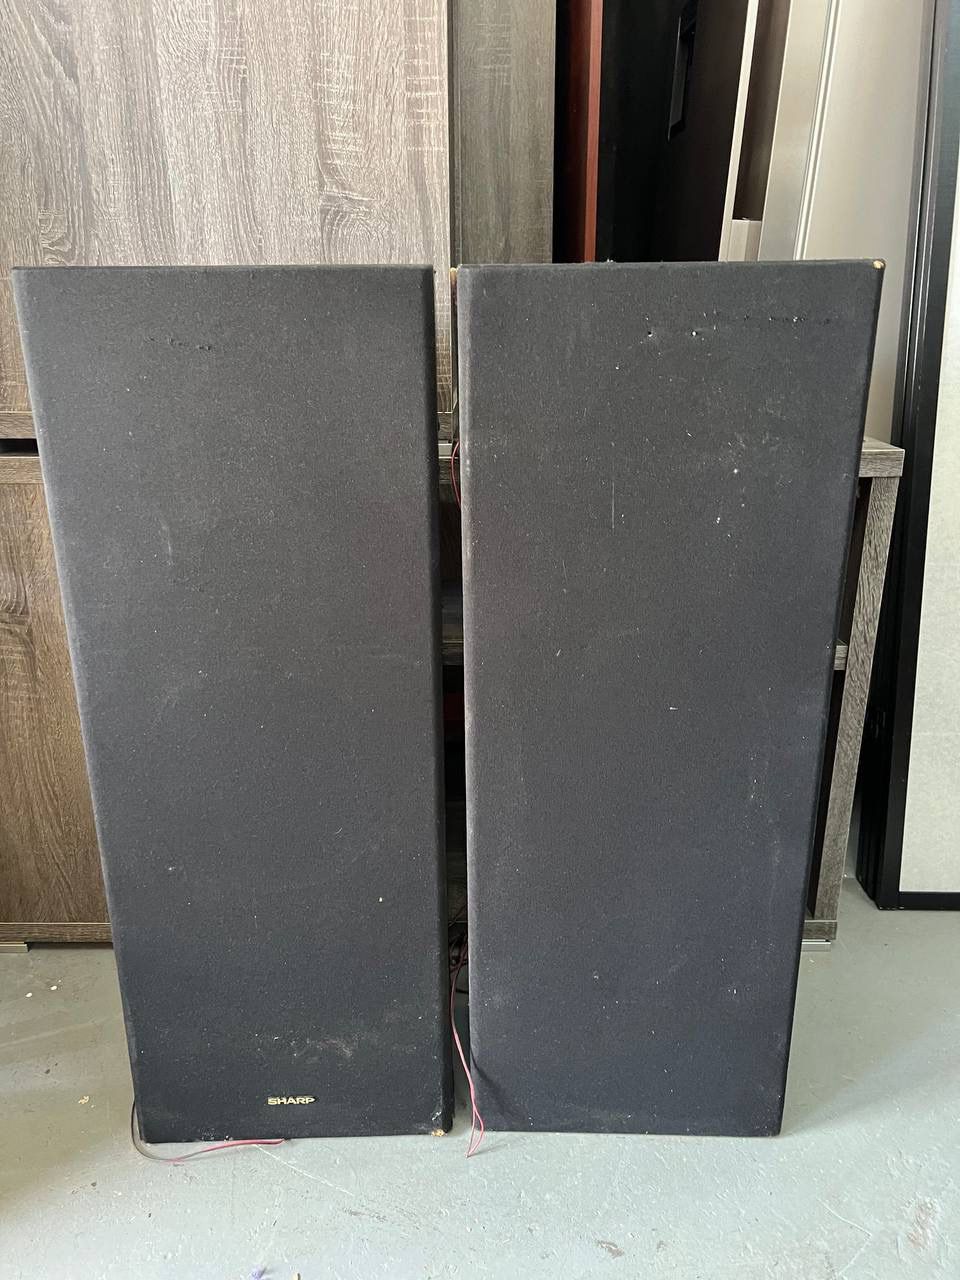 2 large passive speakers, sold as is, $30